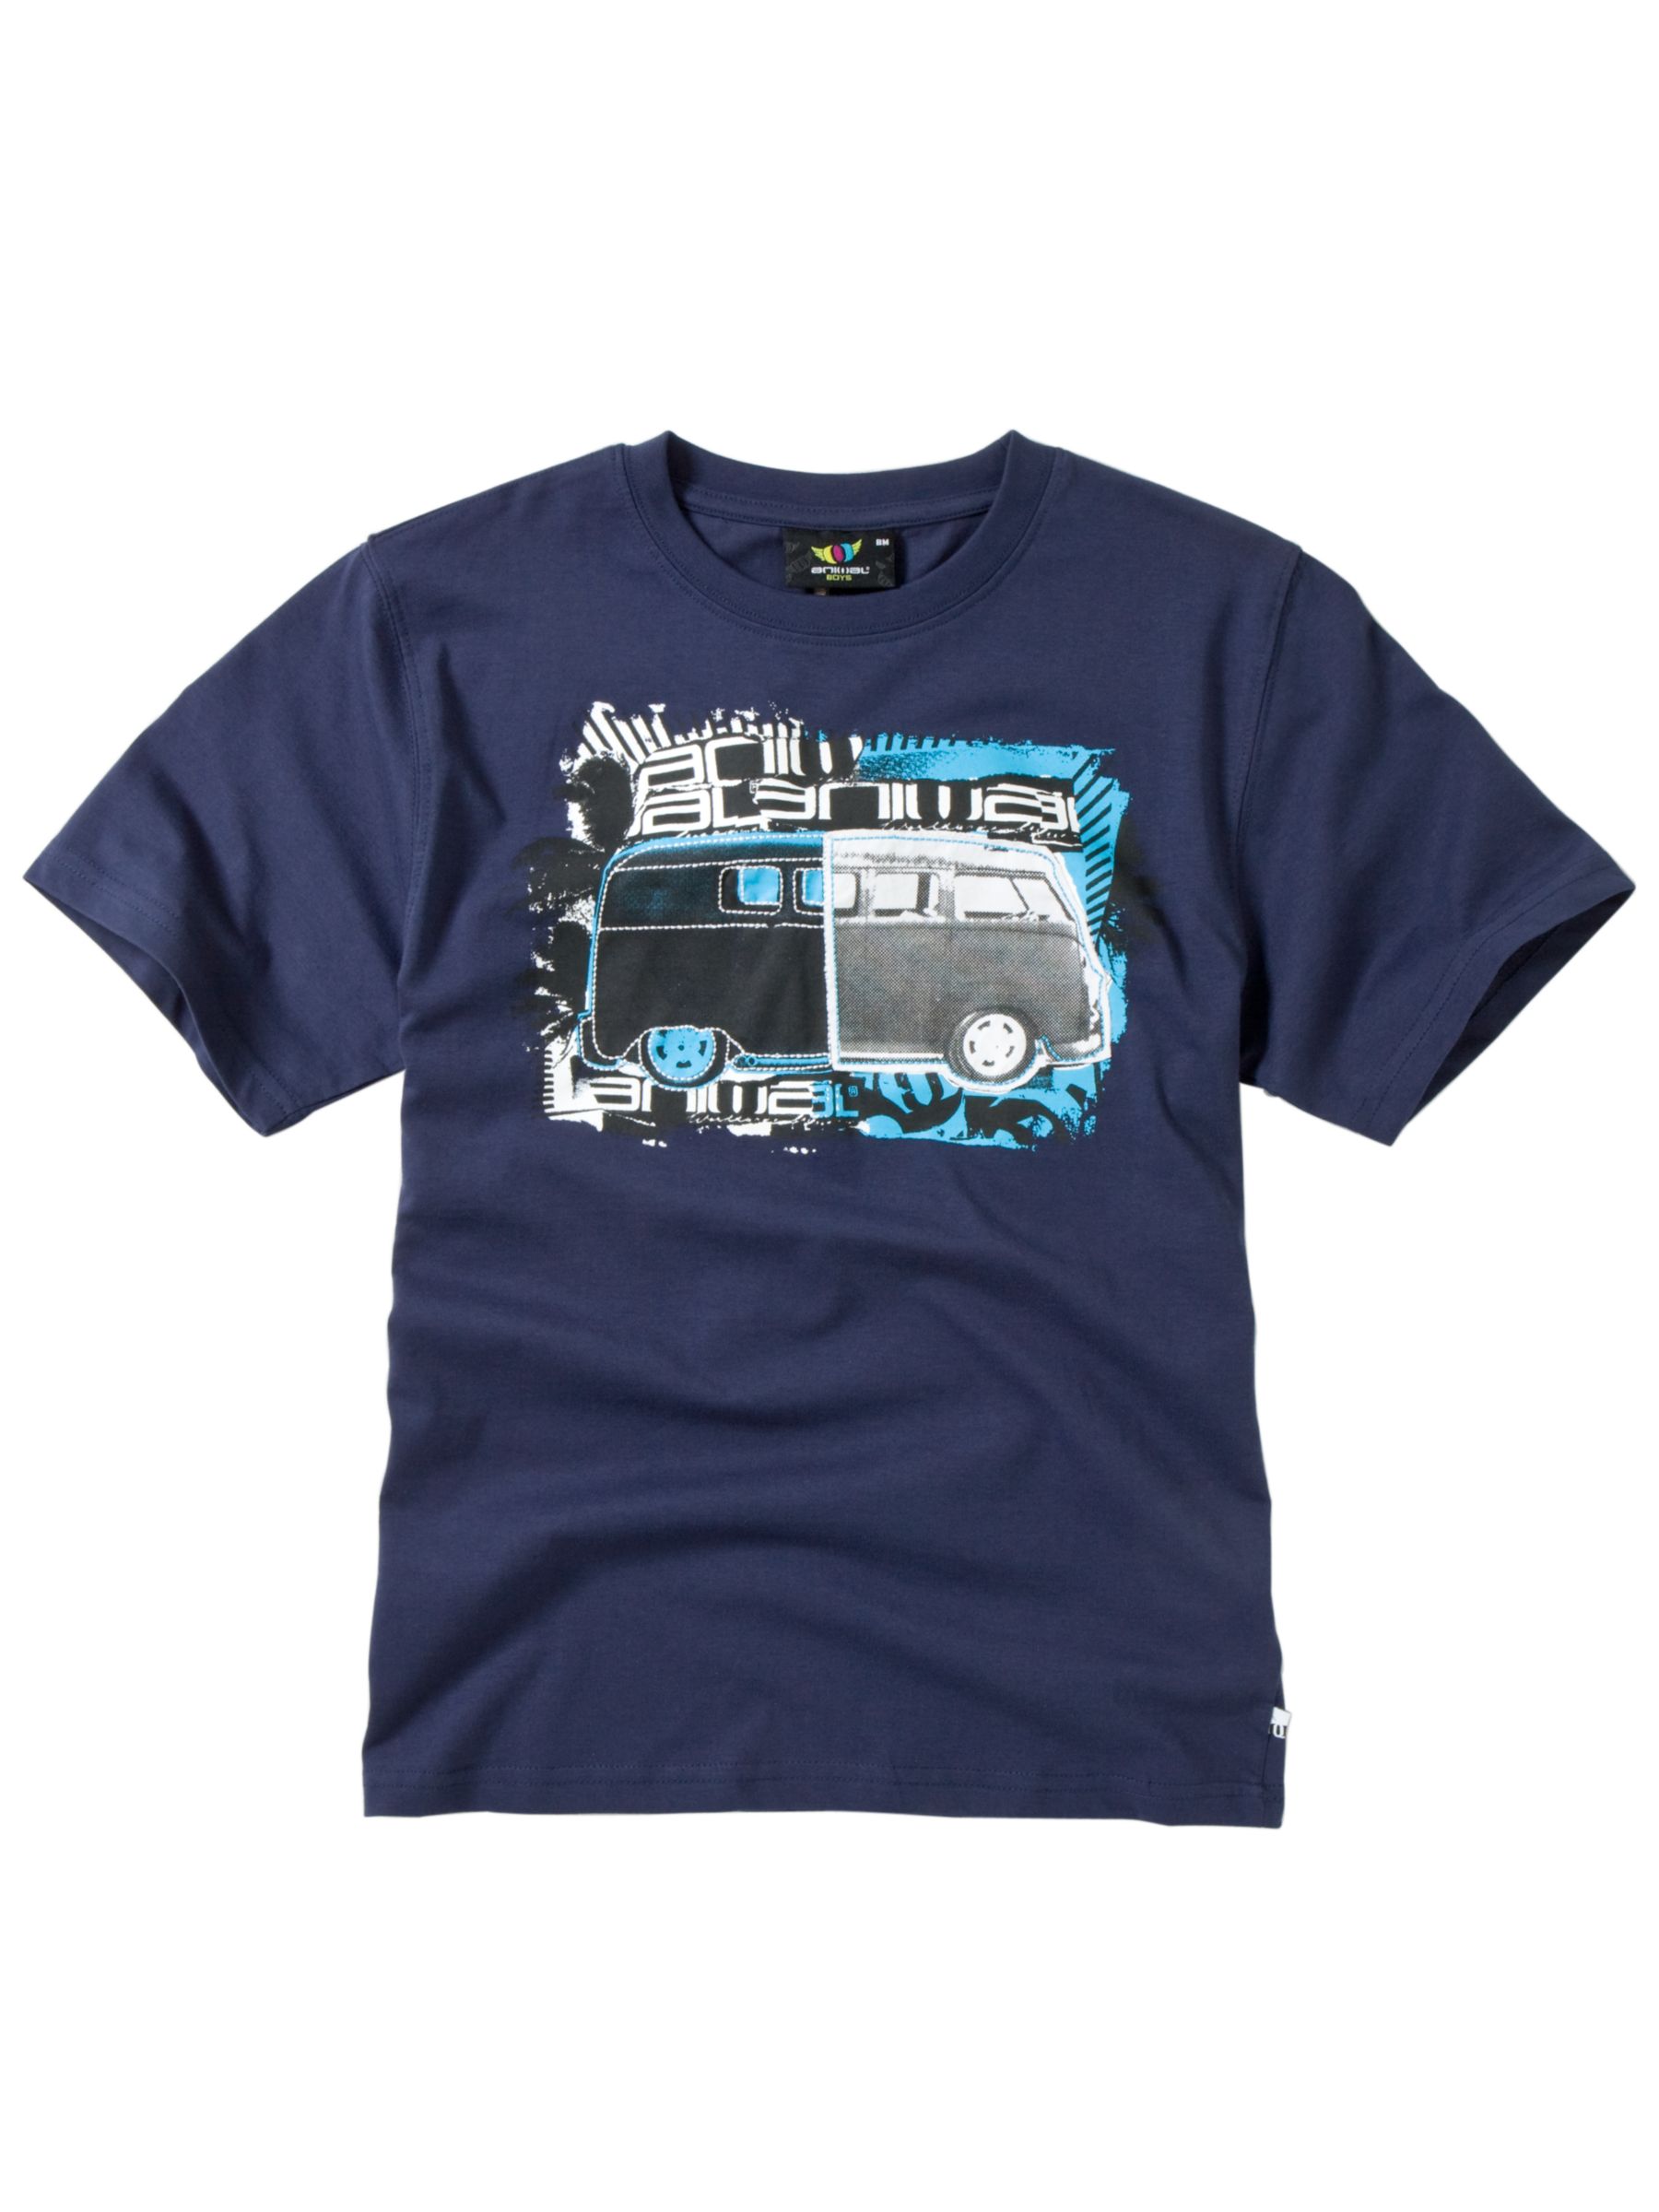 Hayes Deluxe T-Shirt, Navy